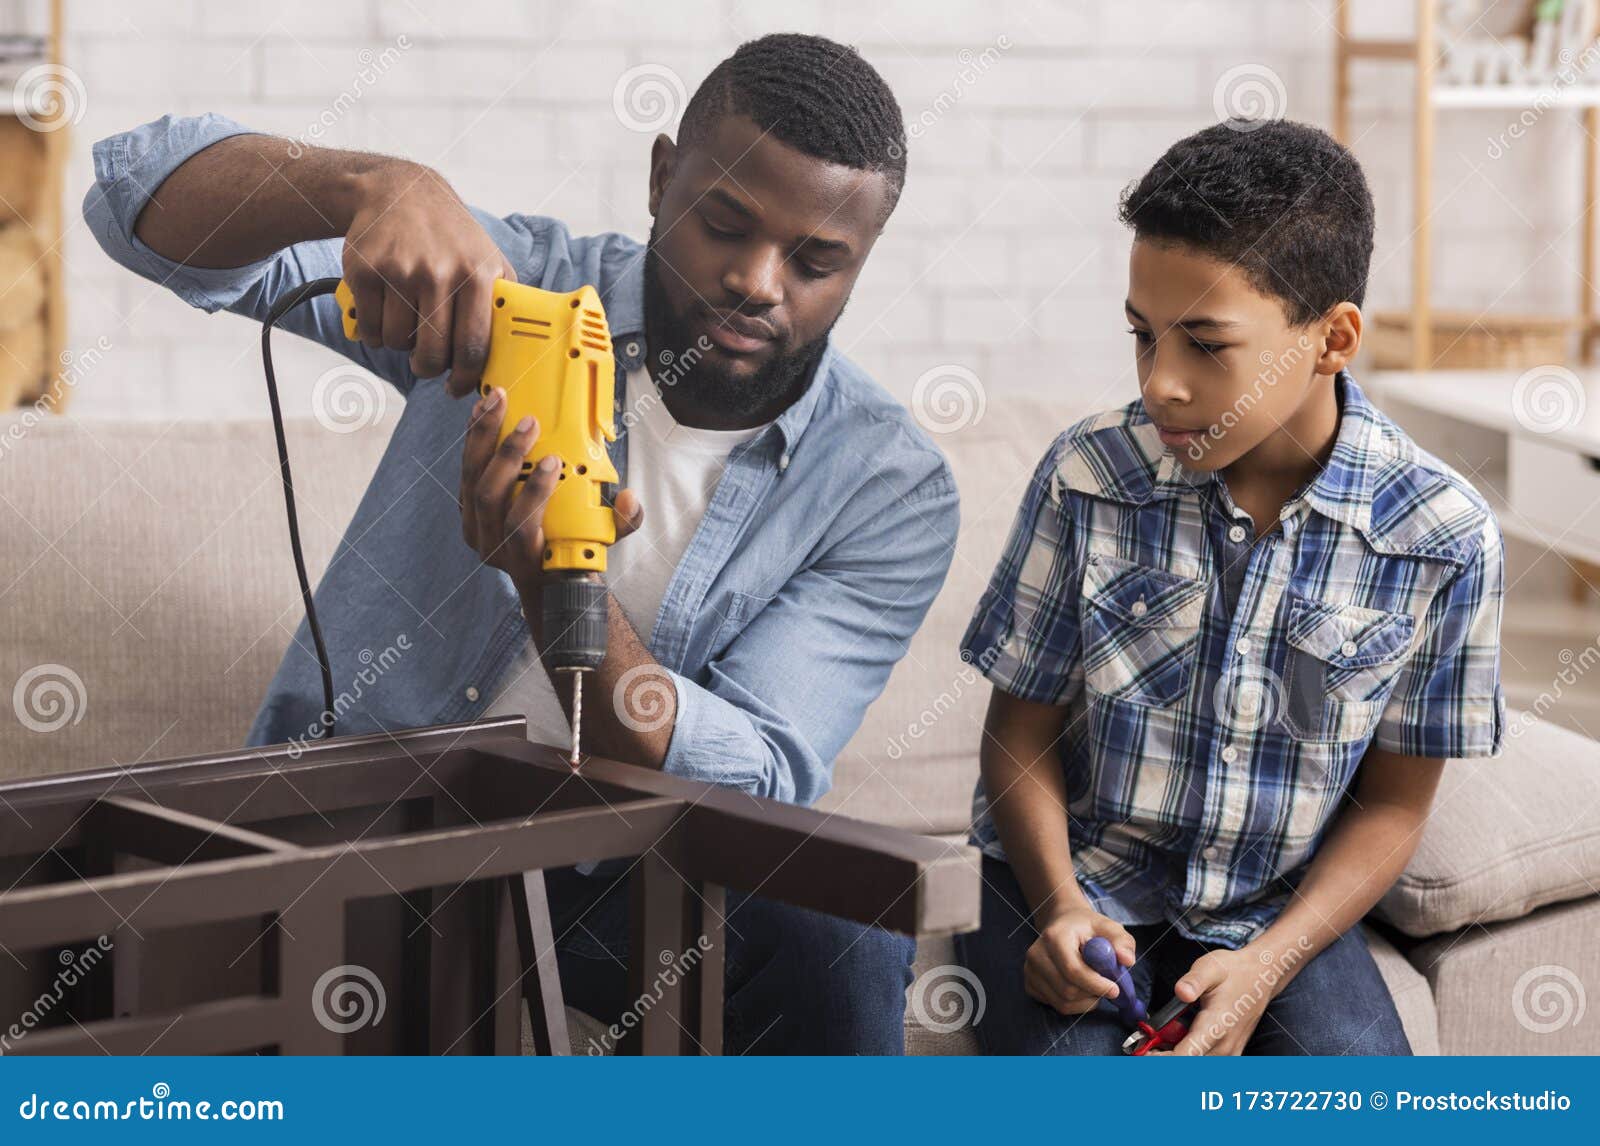 afro dad teaching preschool son to use electric drill at home